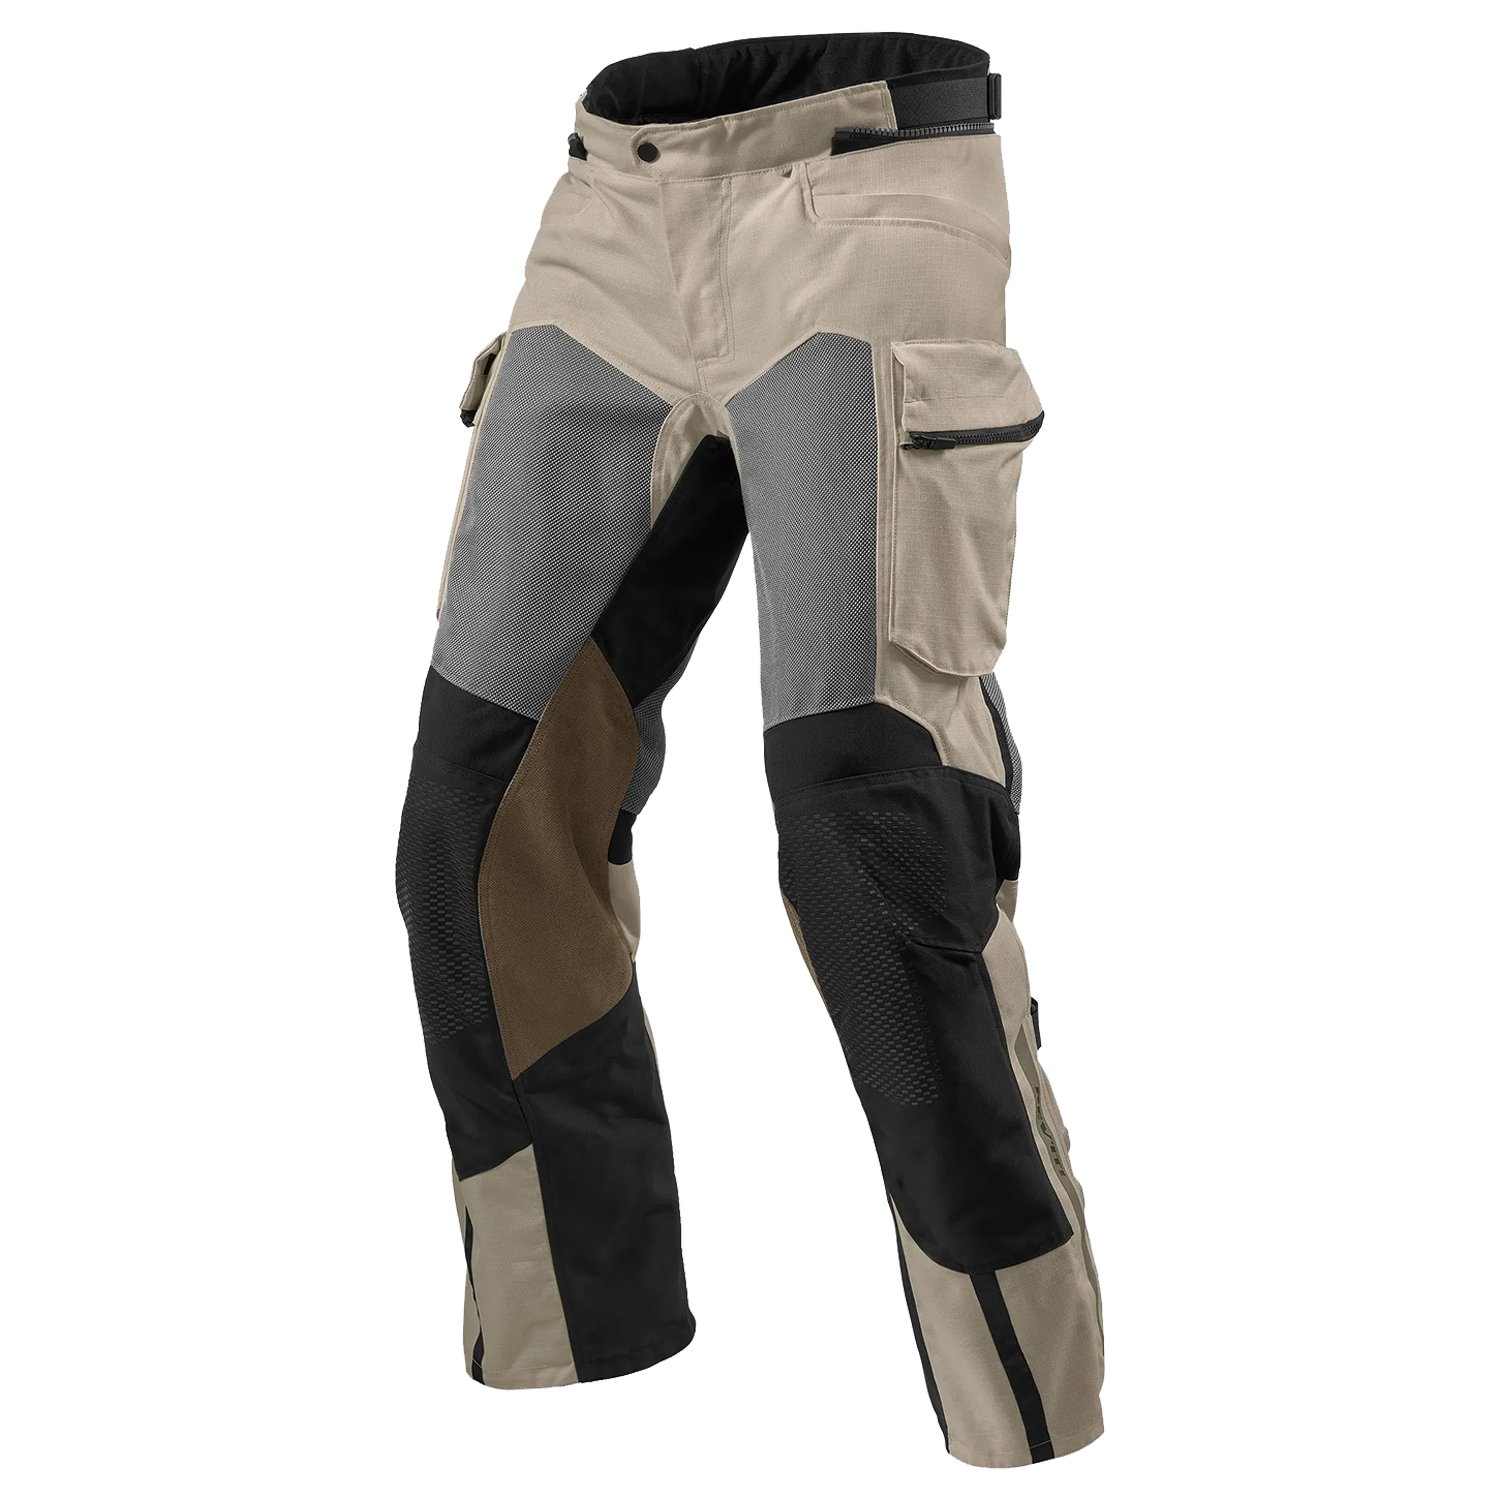 Image of REV'IT! Cayenne 2 Sand Motorcycle Pants Size 2XL ID 8700001346511